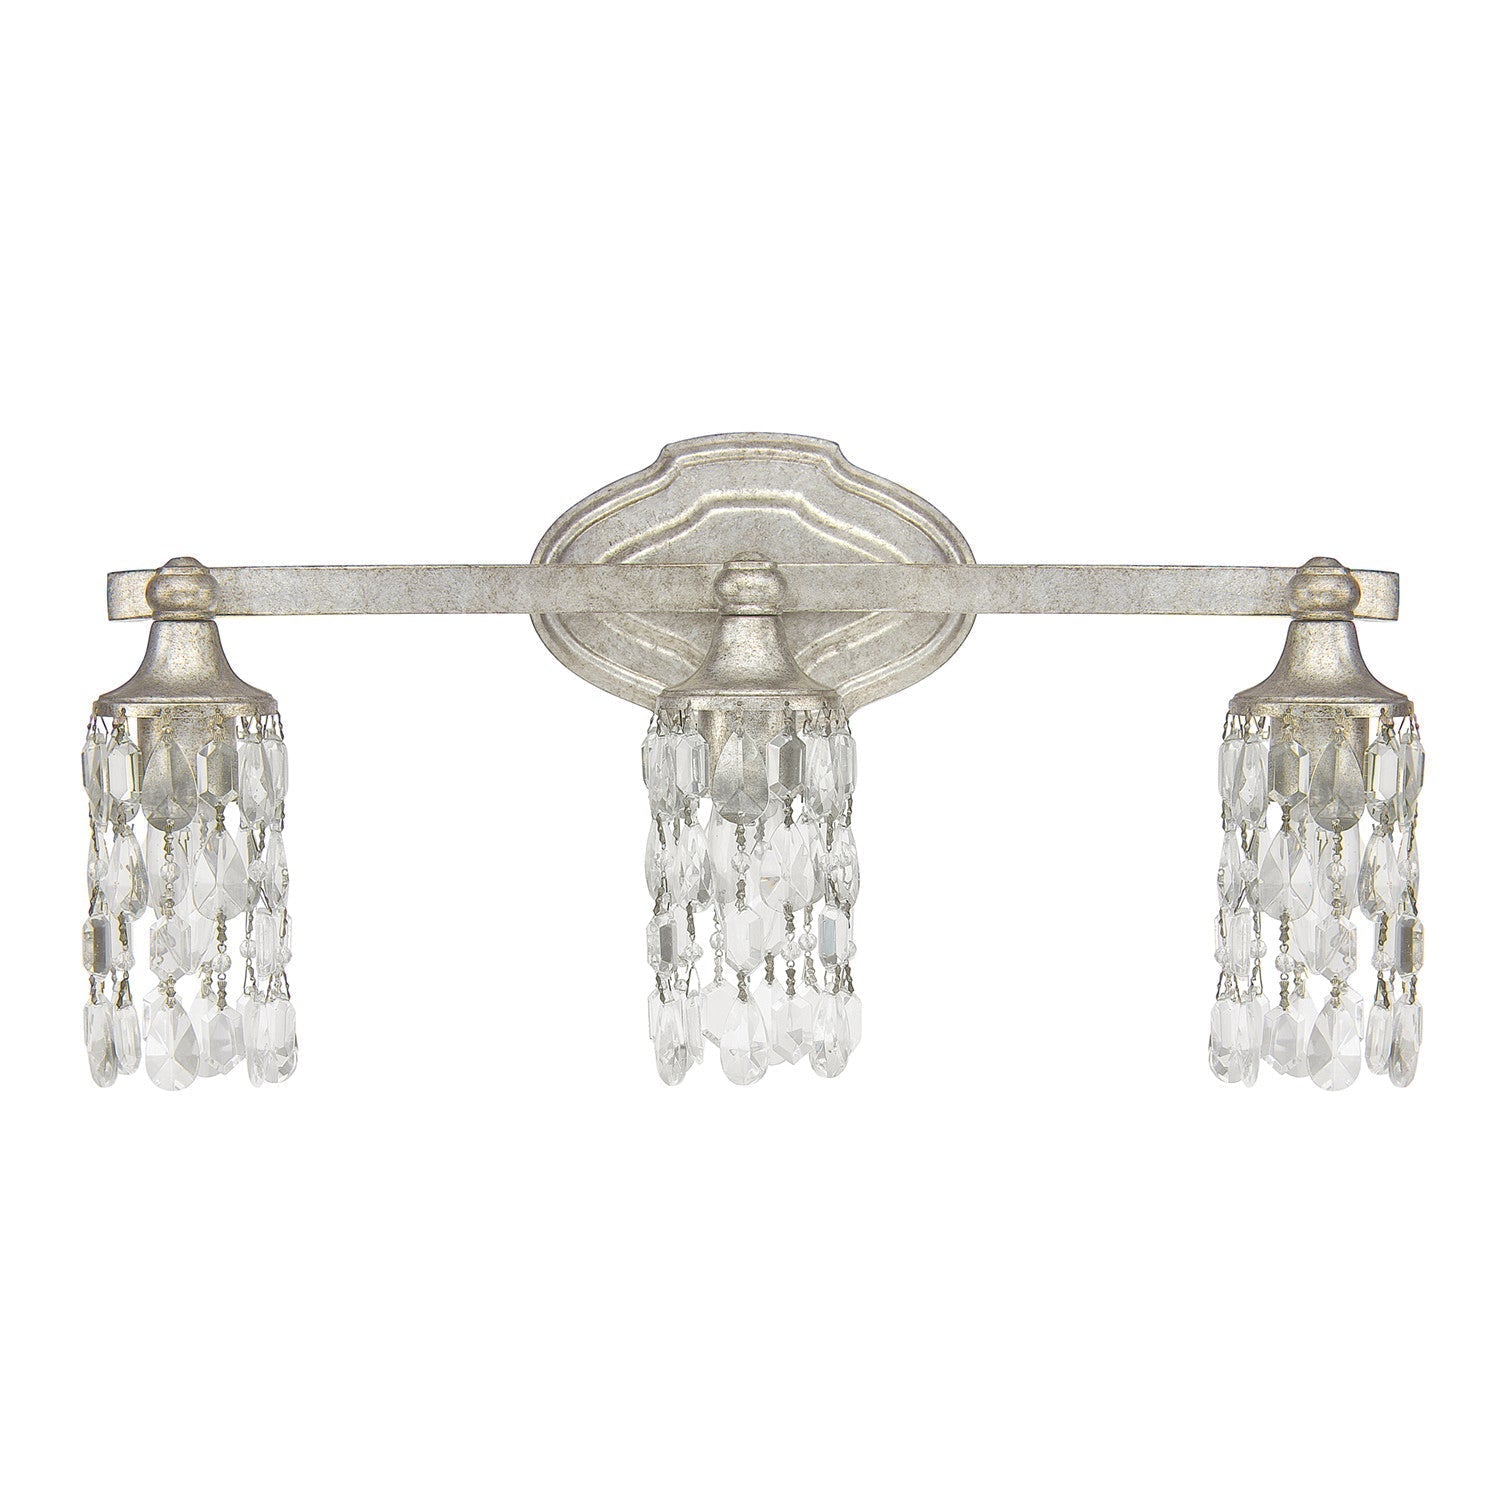 Capital Blakely 8523AS-CR Bath Vanity Light 21 in. wide - Antique Silver